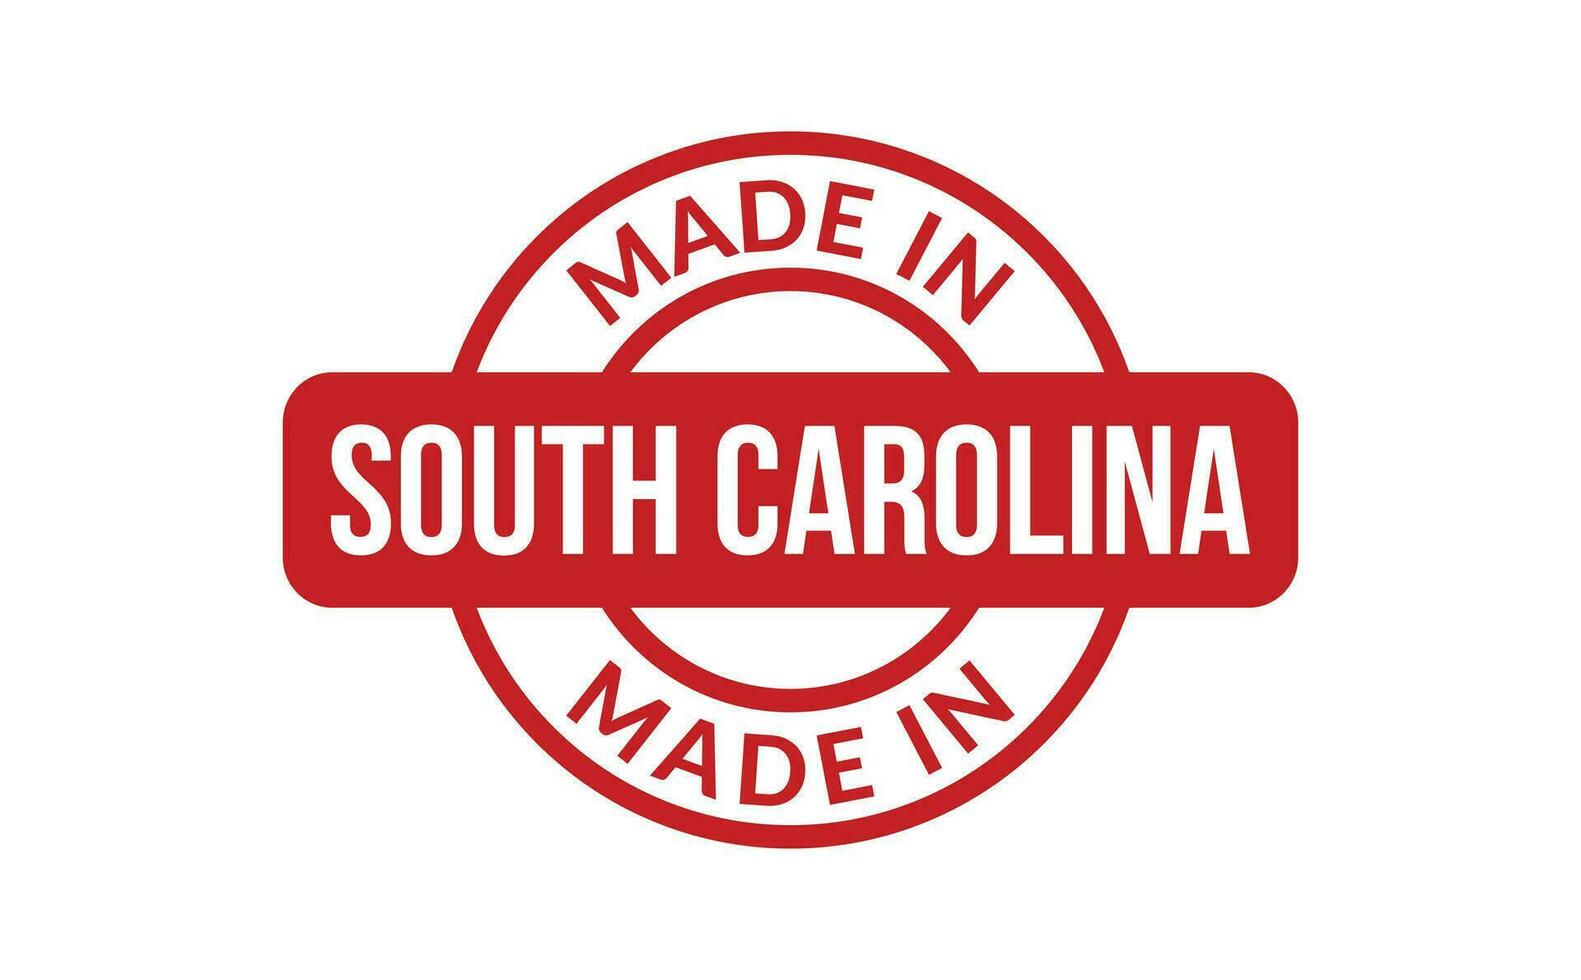 Made In South Carolina Rubber Stamp vector